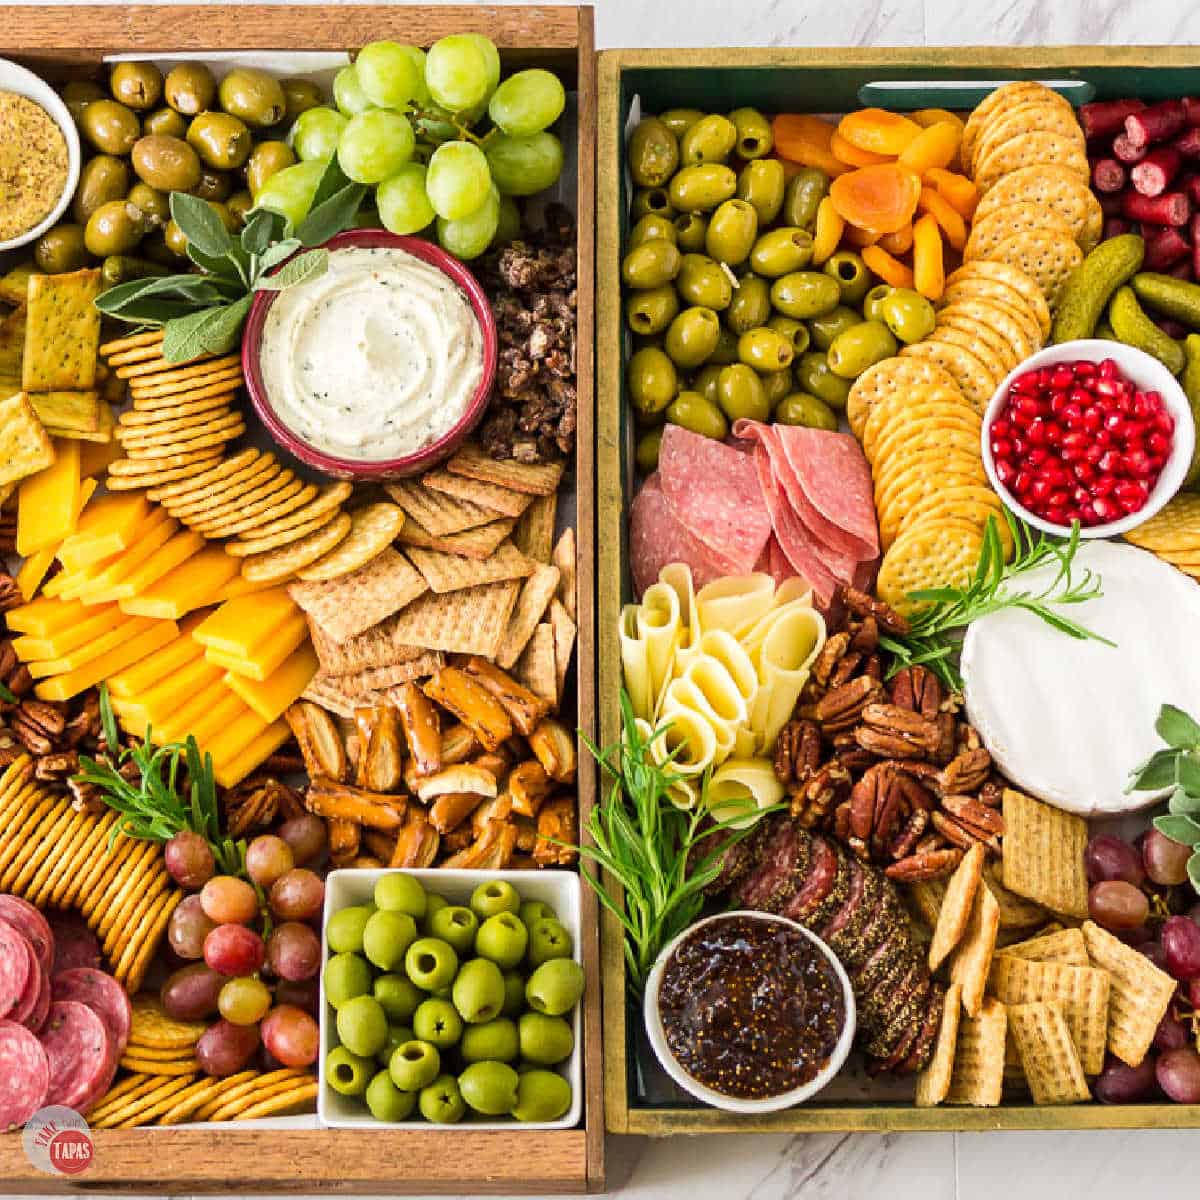 Charcuterie Board For Two - Homemade In The Kitchen